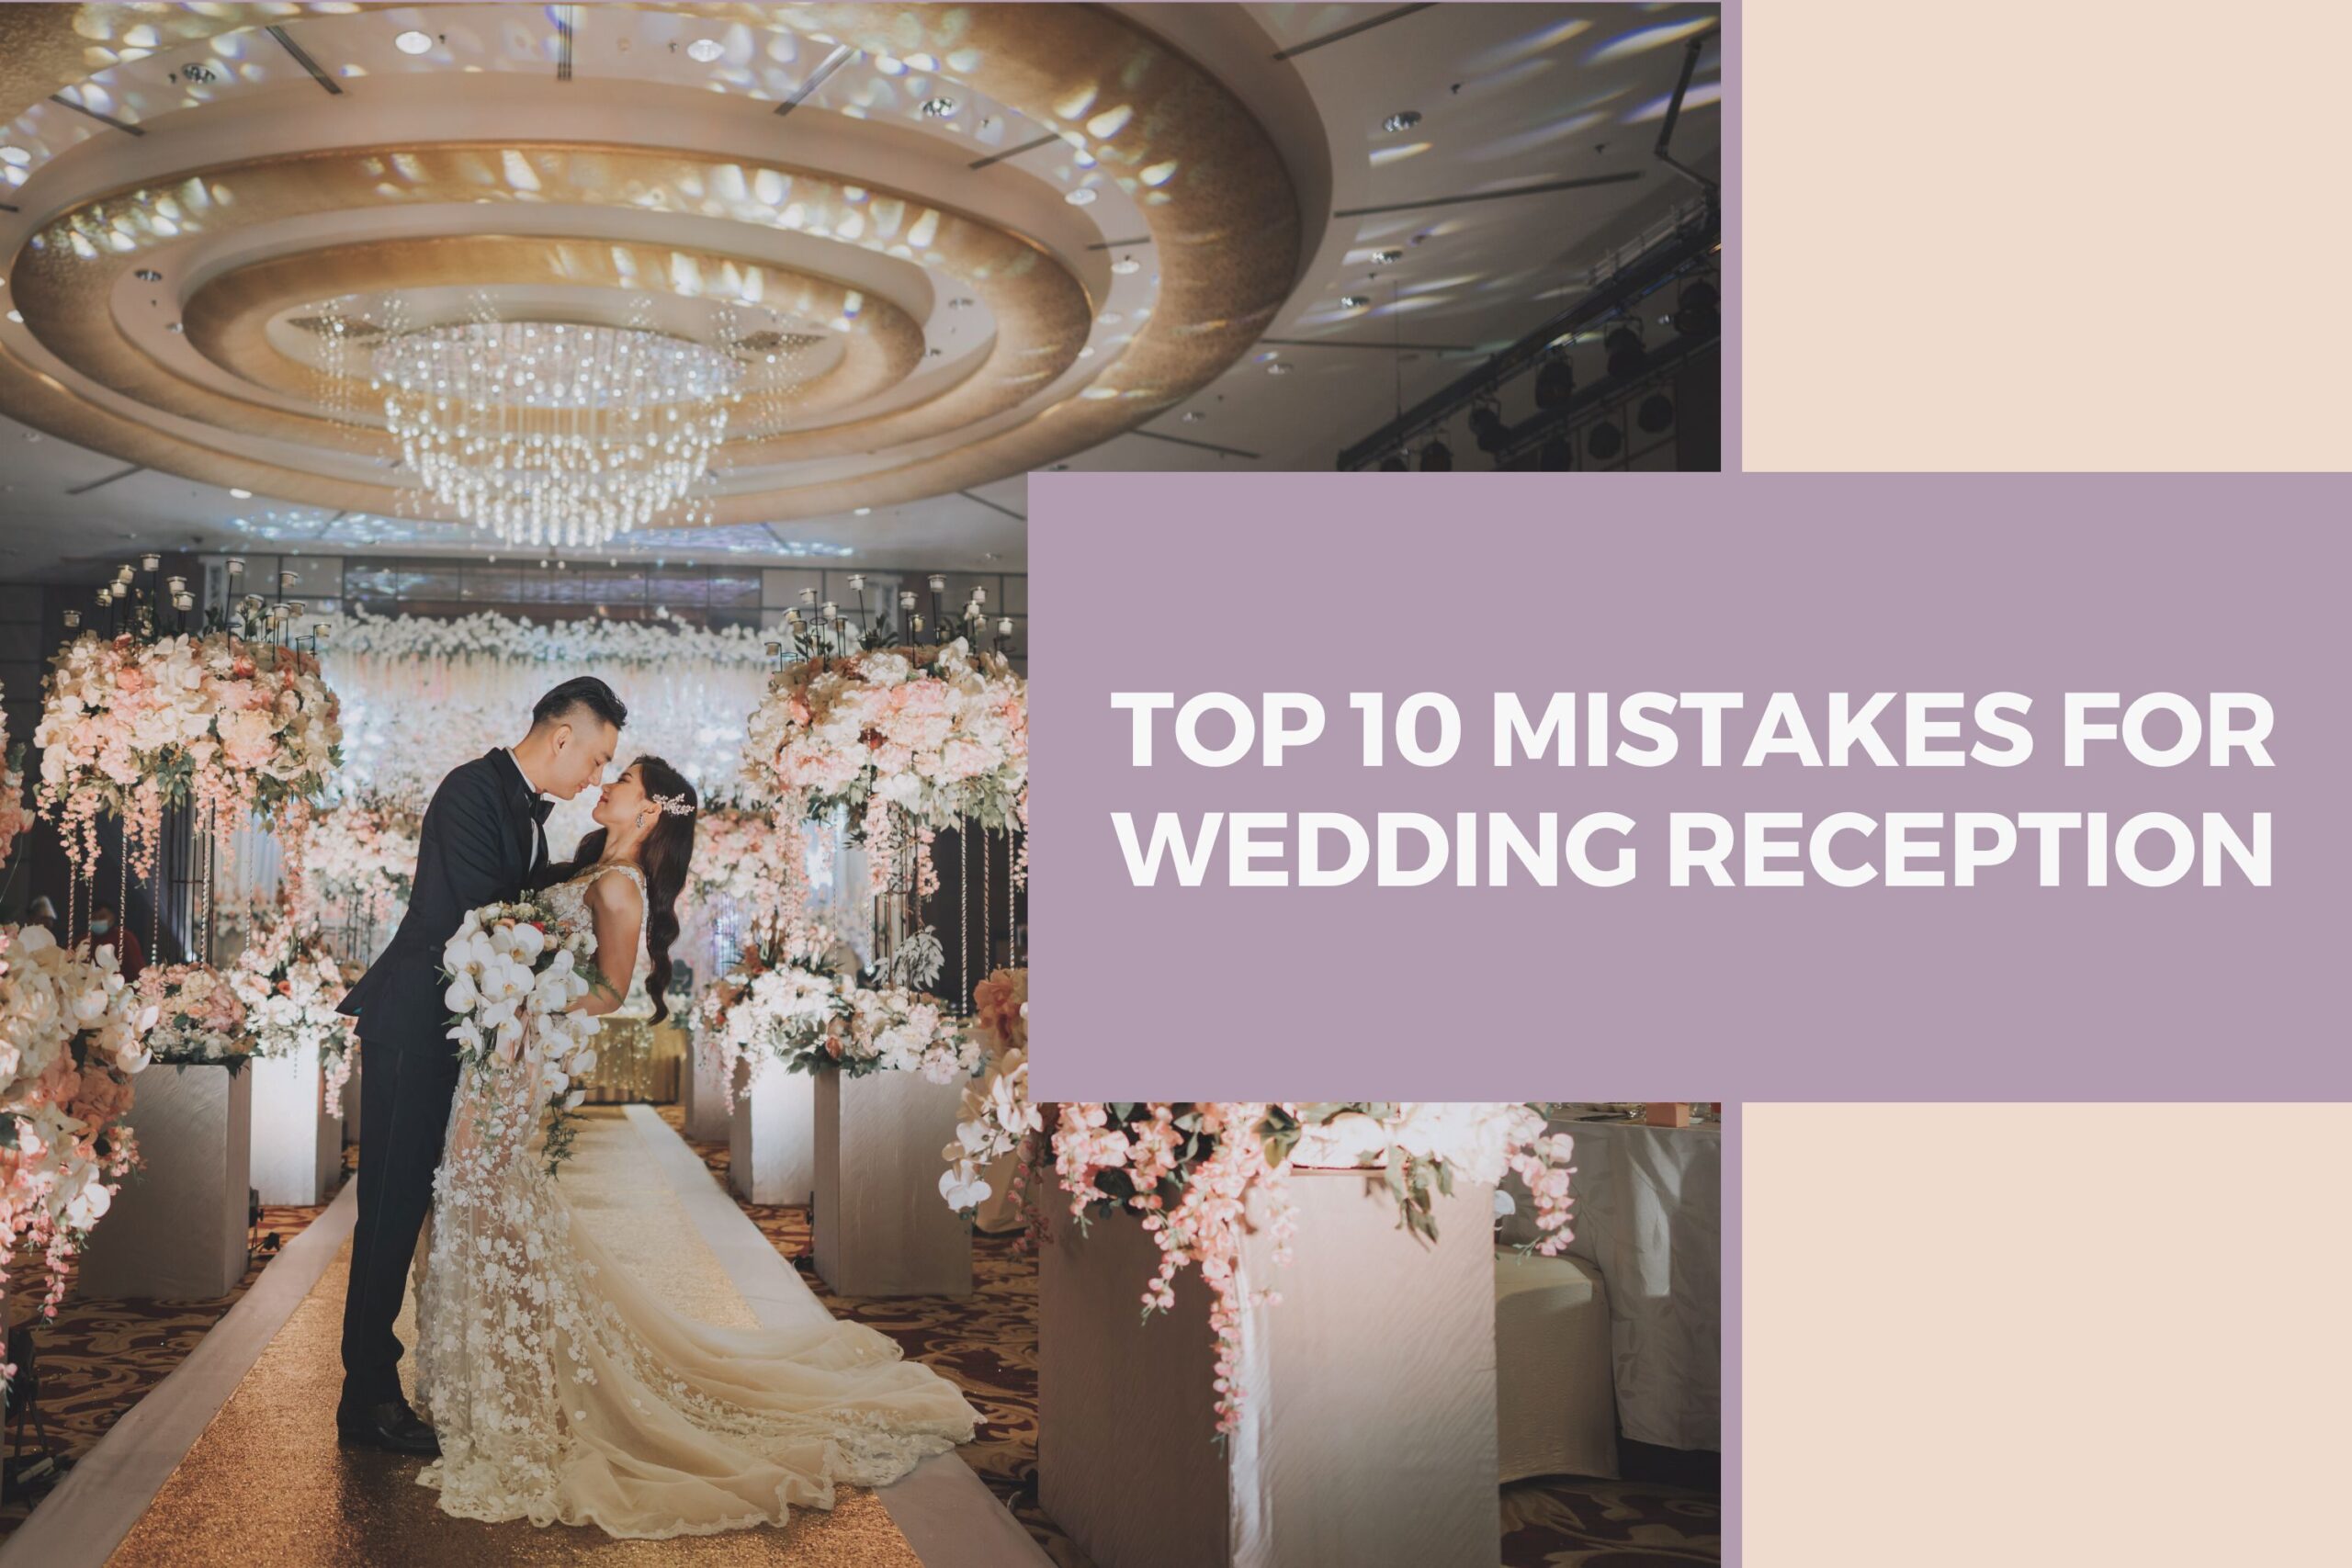 Top 10 Mistakes for Wedding Reception